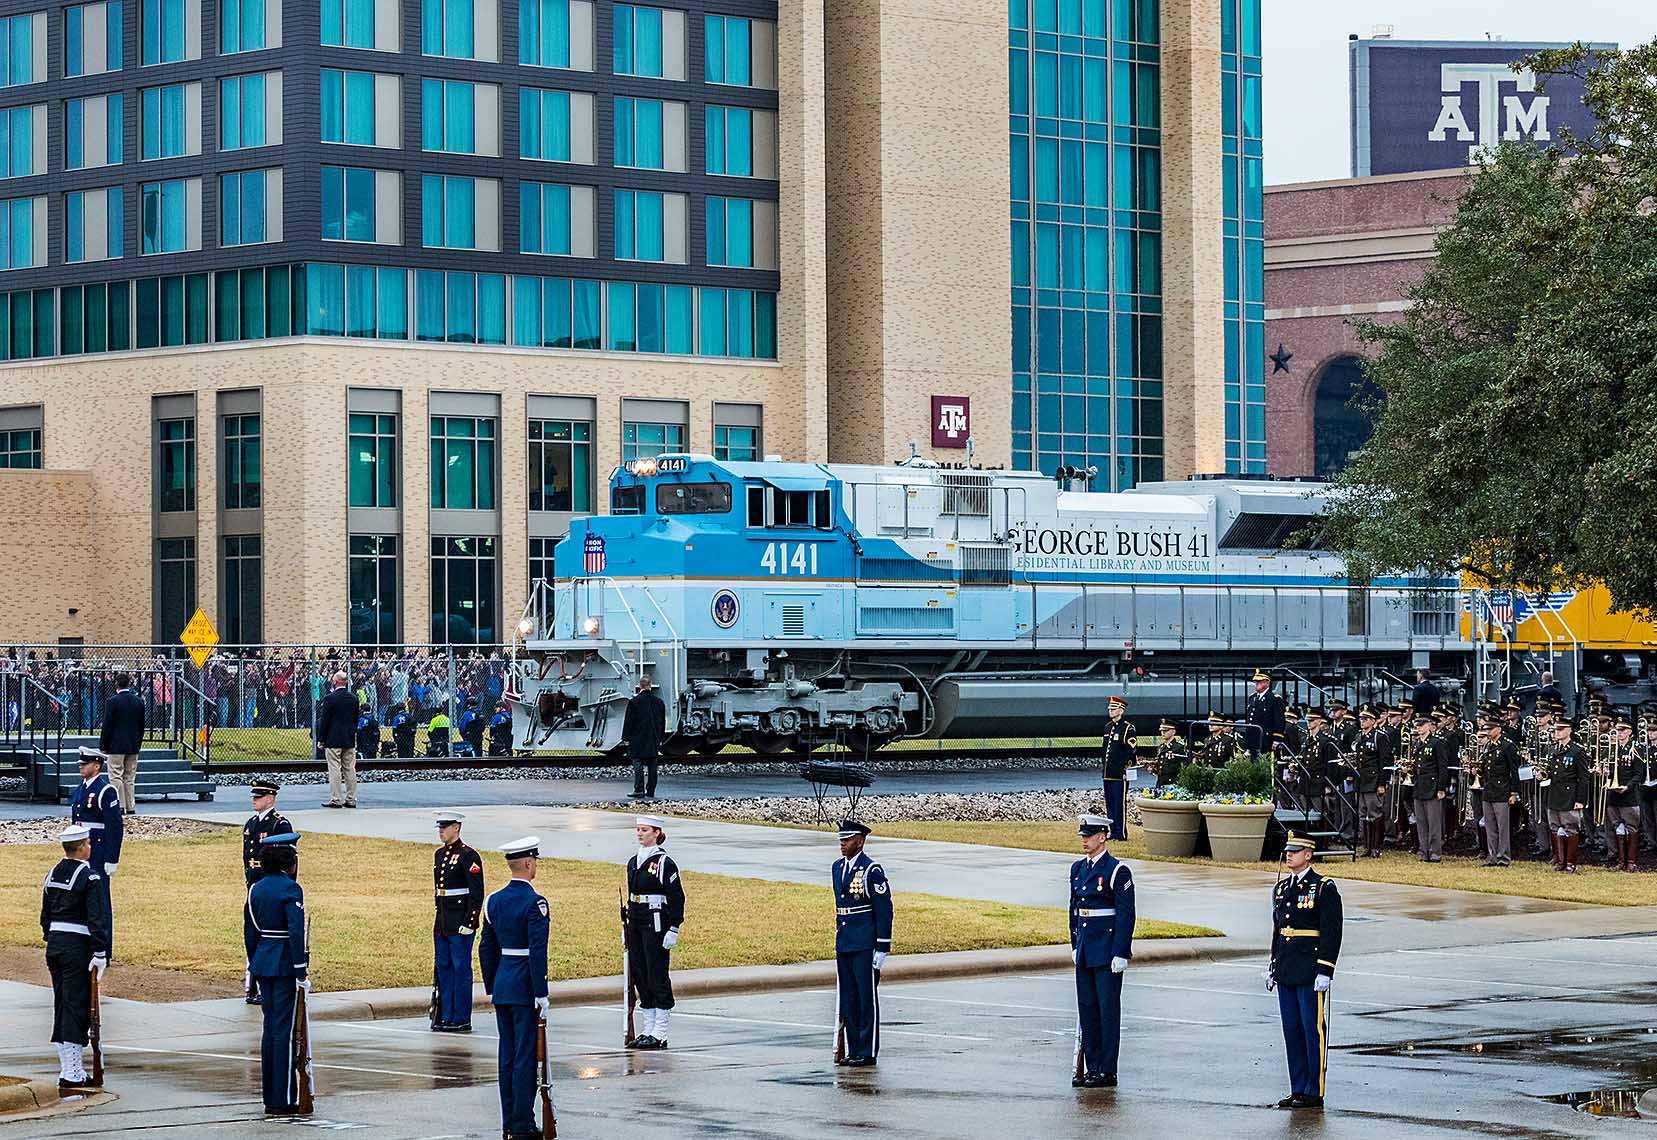 UPRR #4141 arrives for George H. W. Bush funeral at Texas A&M  by Scott Dobry Pictures photographer in Omaha, Nebraska